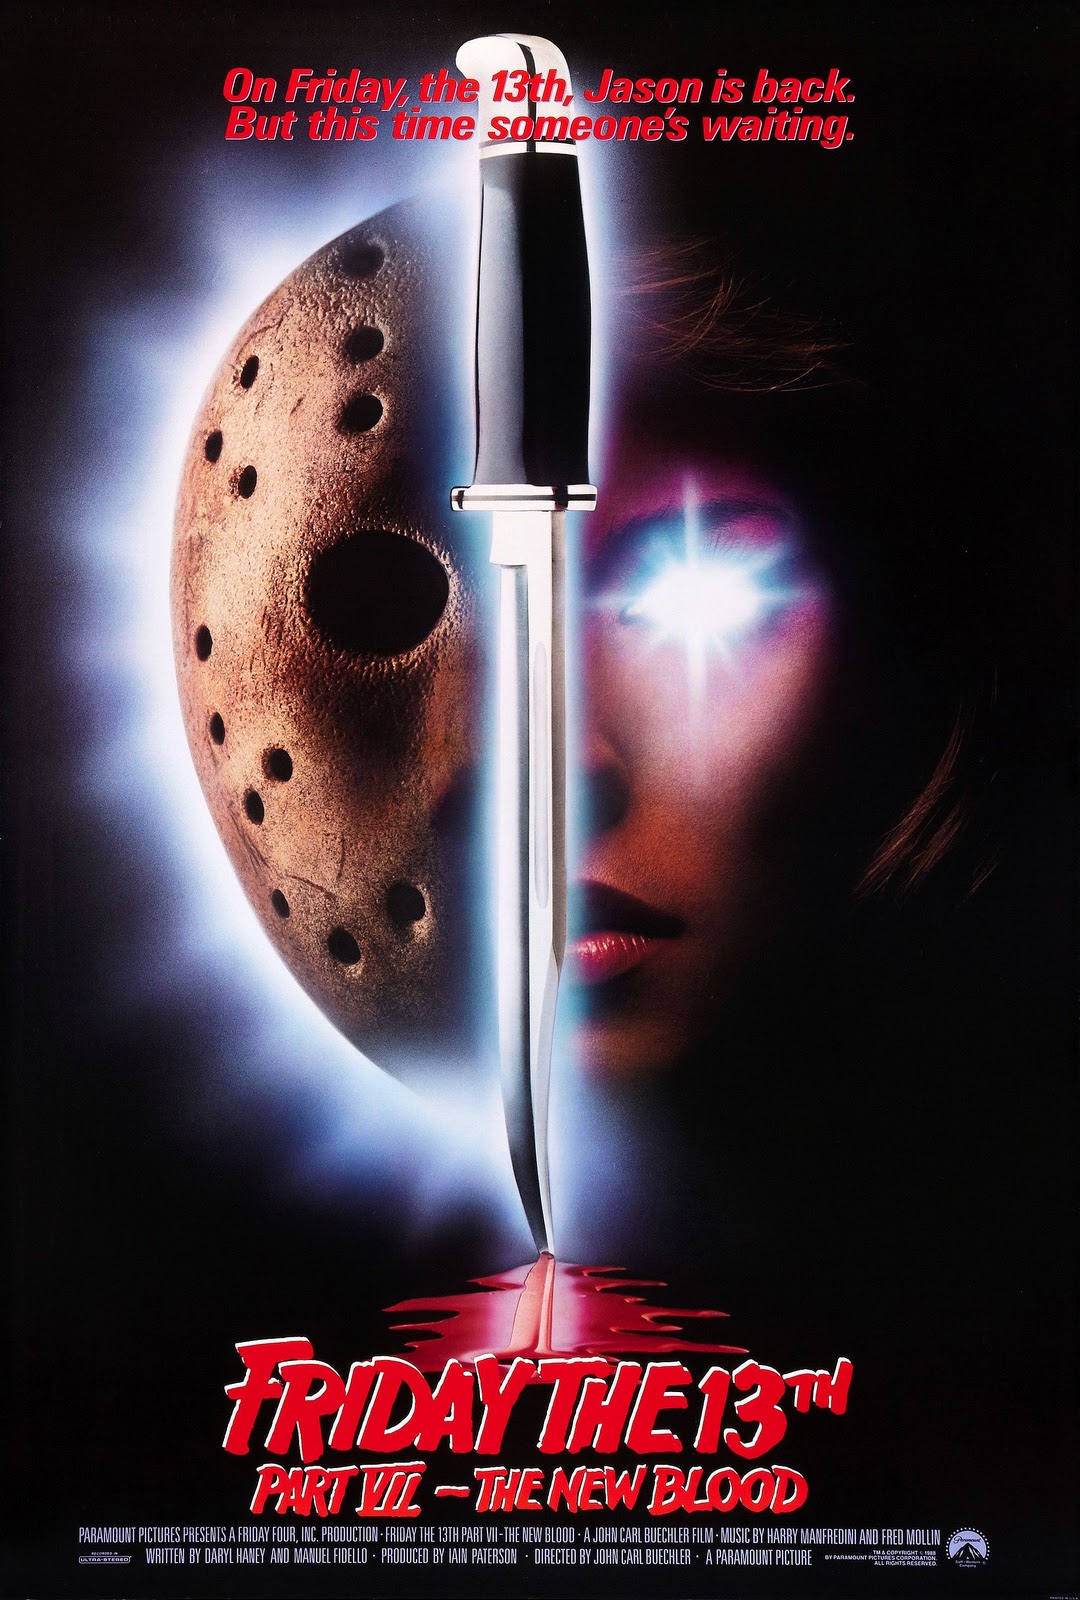 A spoiler-free guide to the 'Friday the 13th' franchise - The Vanderbilt  Hustler